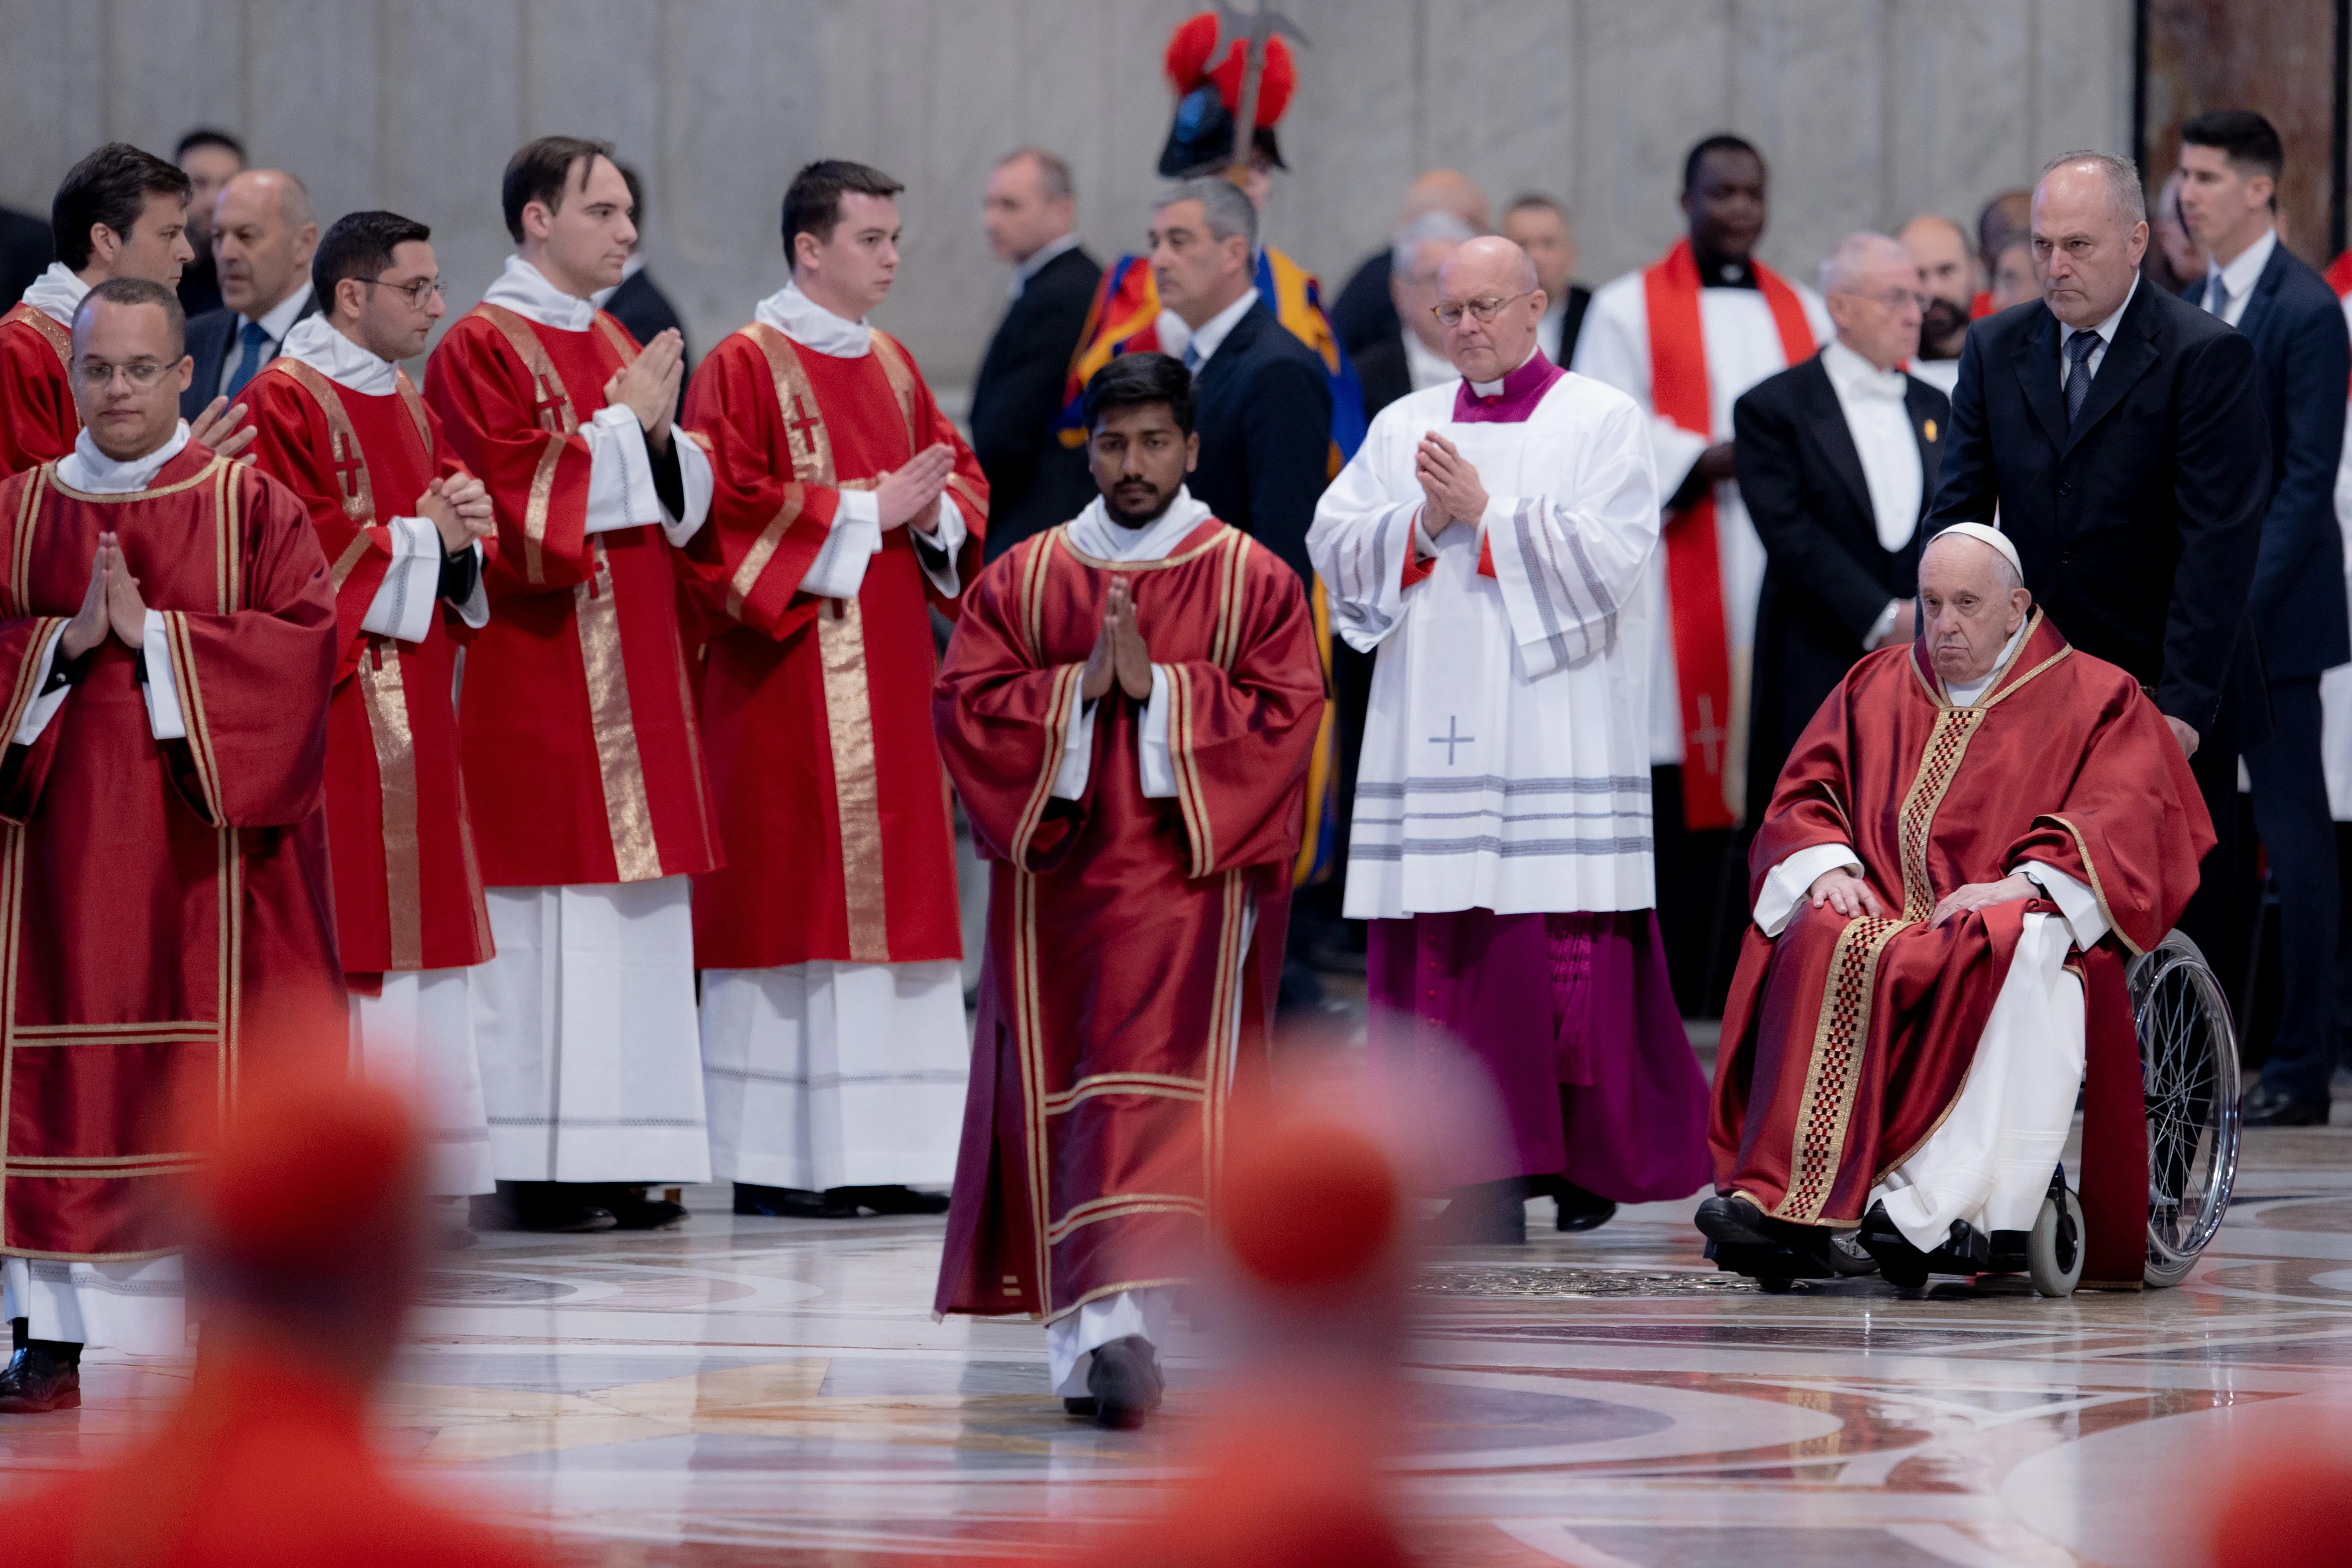 Pope Francis arrives at the Liturgy of the Lord’s Passion in St. Peter's Basilica on Good Friday on April 7, 2023. / Credit: Daniel Ibanez/CNA